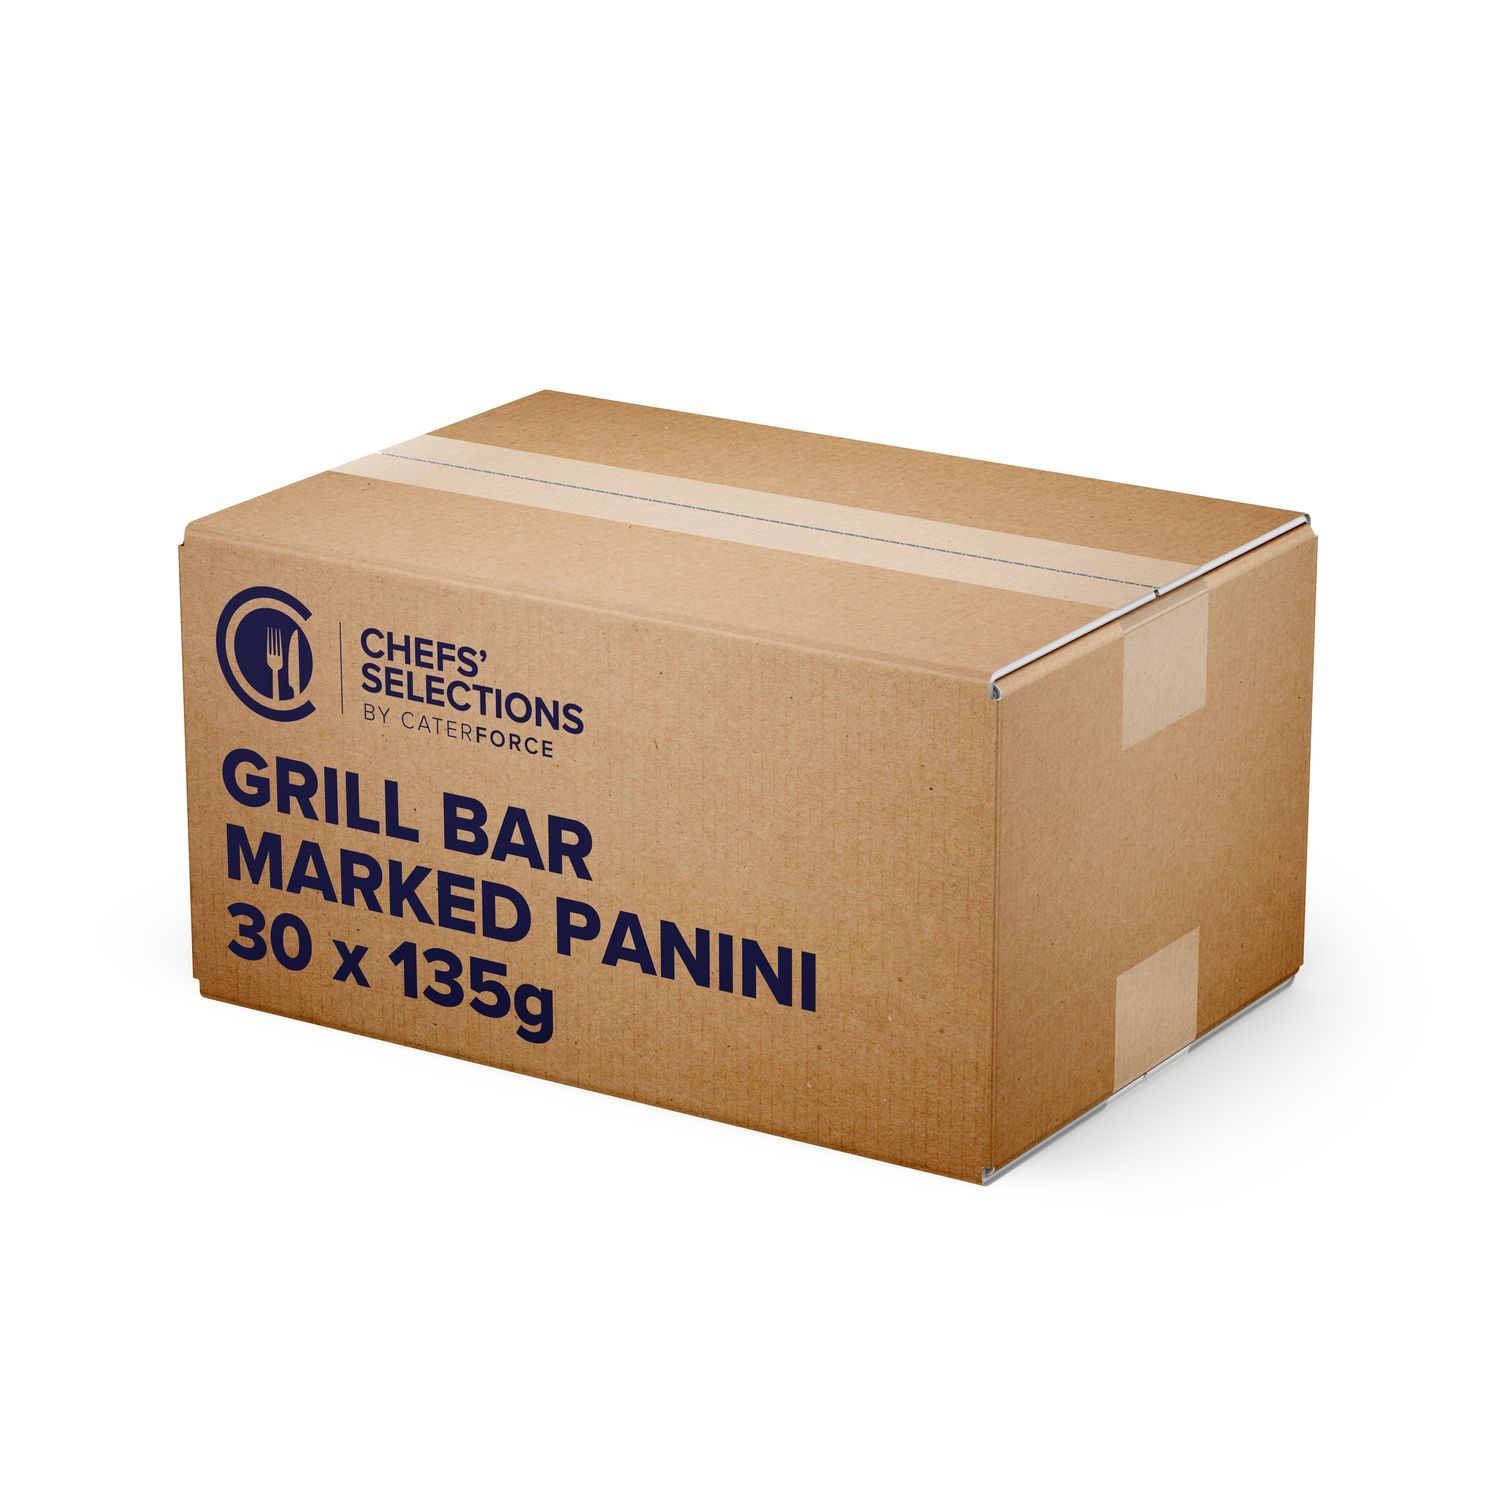 Chefs’ Selections Grill Bar Marked Panini (30 x 135g)